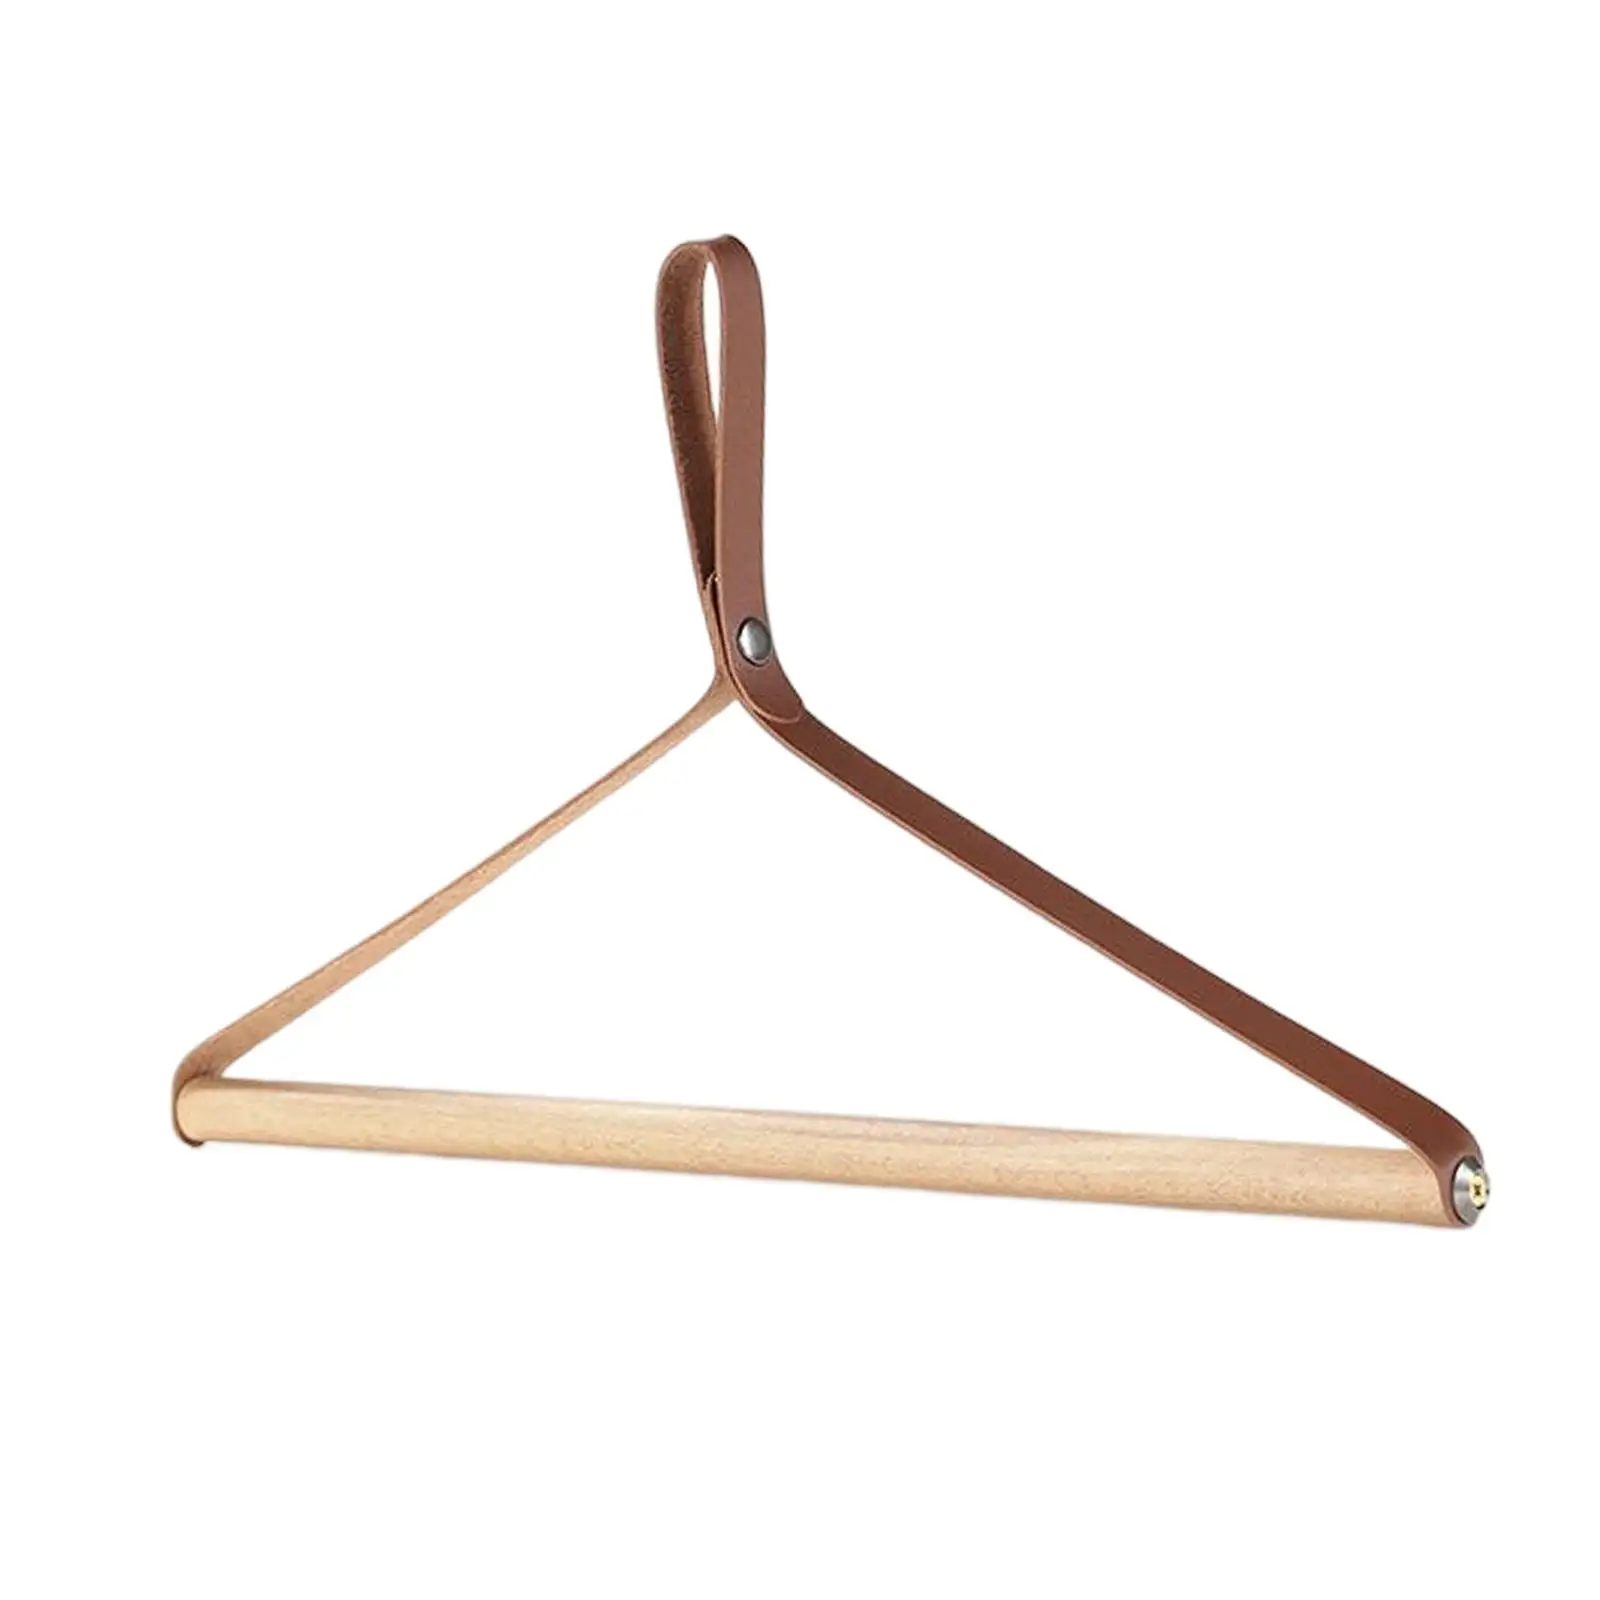 Wooden Folding Hanger Clothing Drying Rack Foldable for Camping Laundry Tent